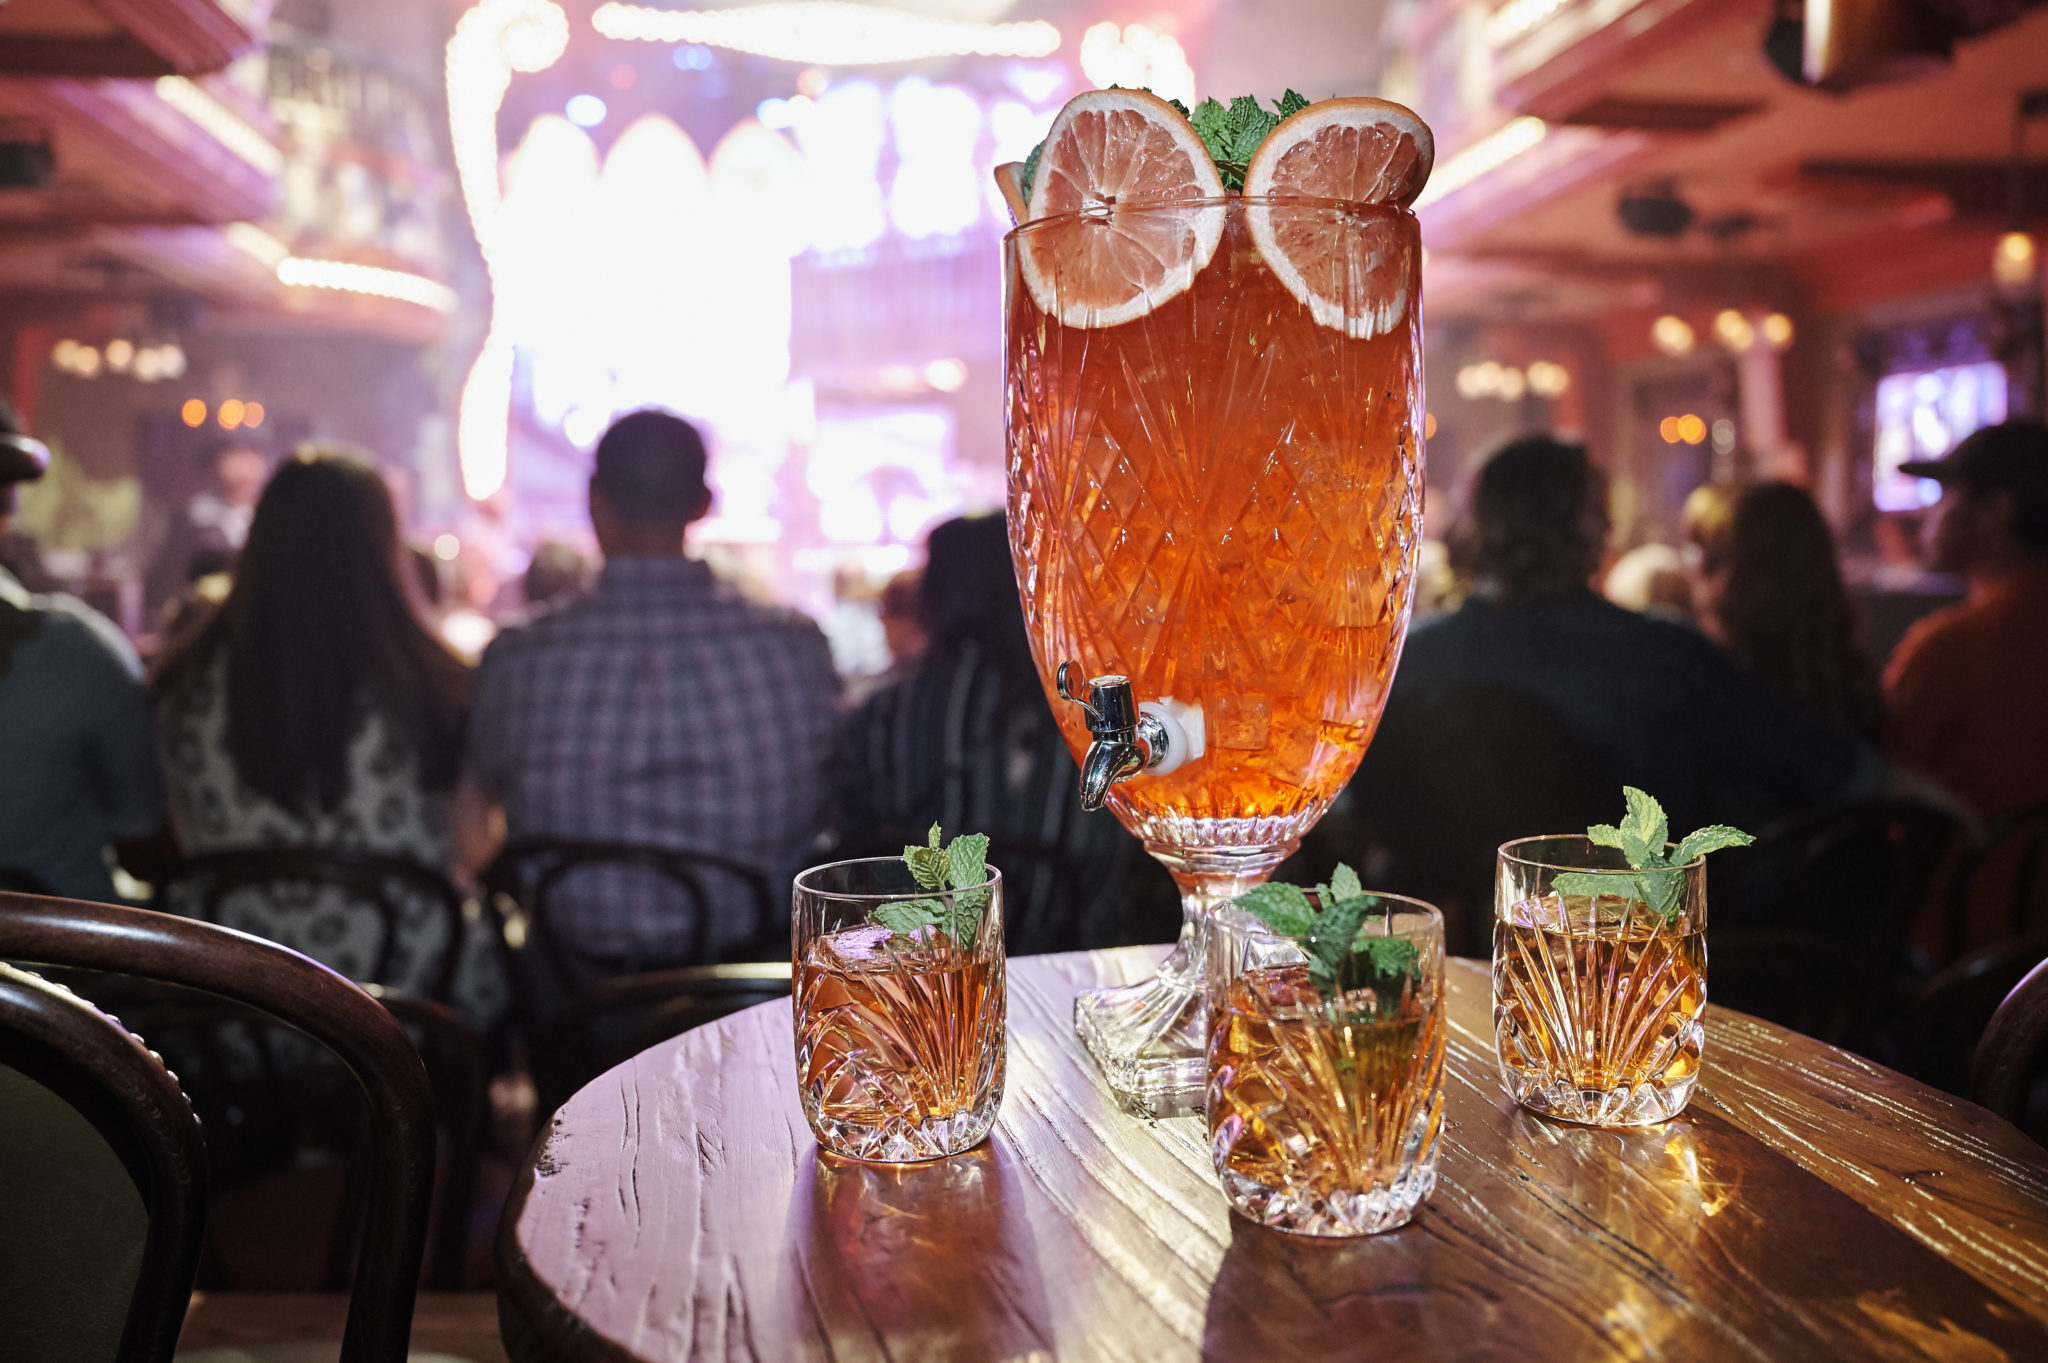 https://spiegelworld.com/wp-content/uploads/2021/02/ATOMIC-SALOON-SHOW-Cocktail-and-Dining-Program_credit-Al-Powers-for-Spiegelworld_1-2048x1363-1.jpg